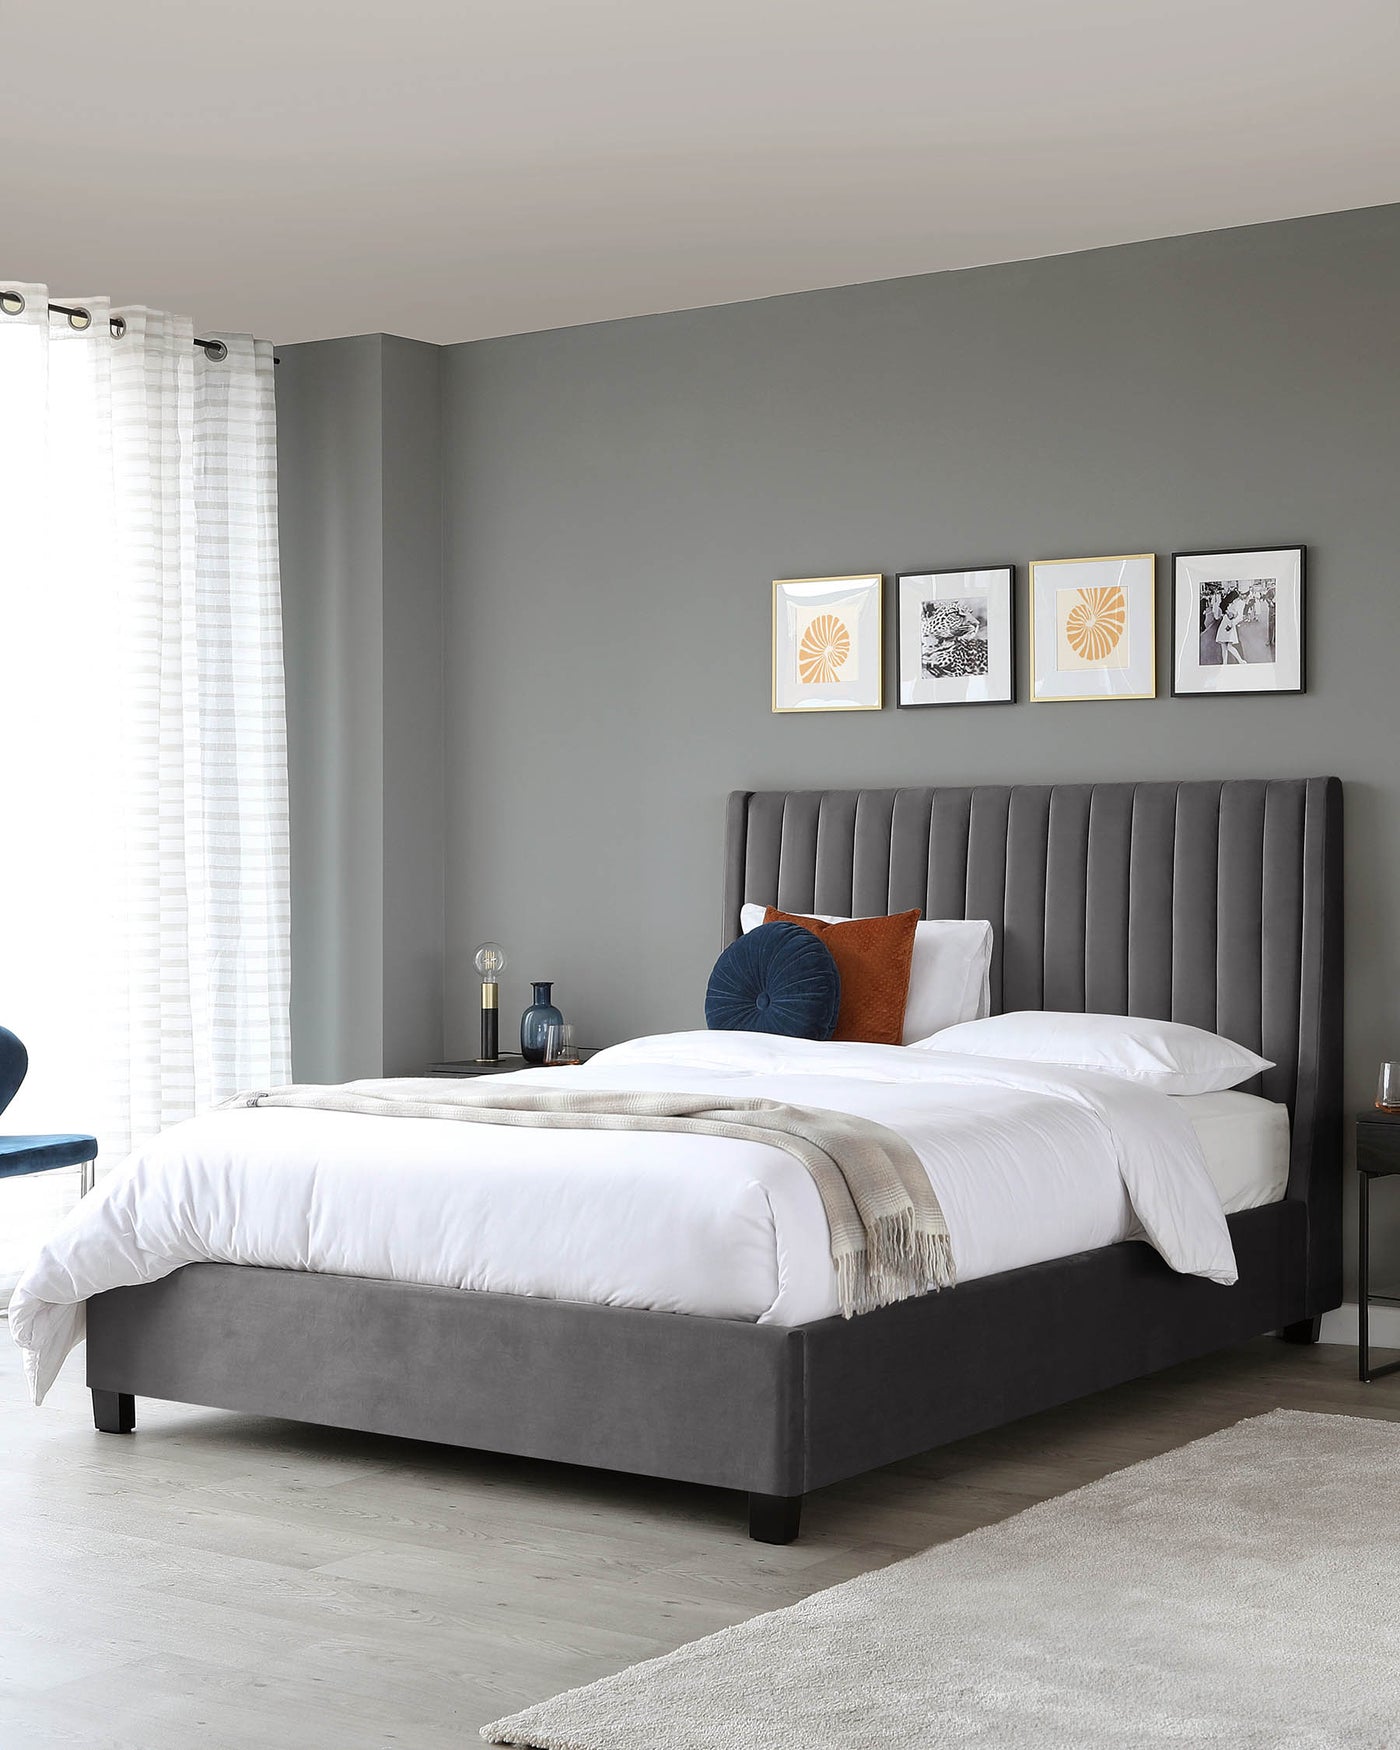 A modern grey upholstered platform bed with a high vertical channel-tufted headboard, complemented by white bedding, two pillows, and a beige fringed throw blanket. A small black nightstand with a table lamp is beside the bed, and a round blue chair is seen partially in the corner. The room features a light grey floor and area rug with a smooth texture.